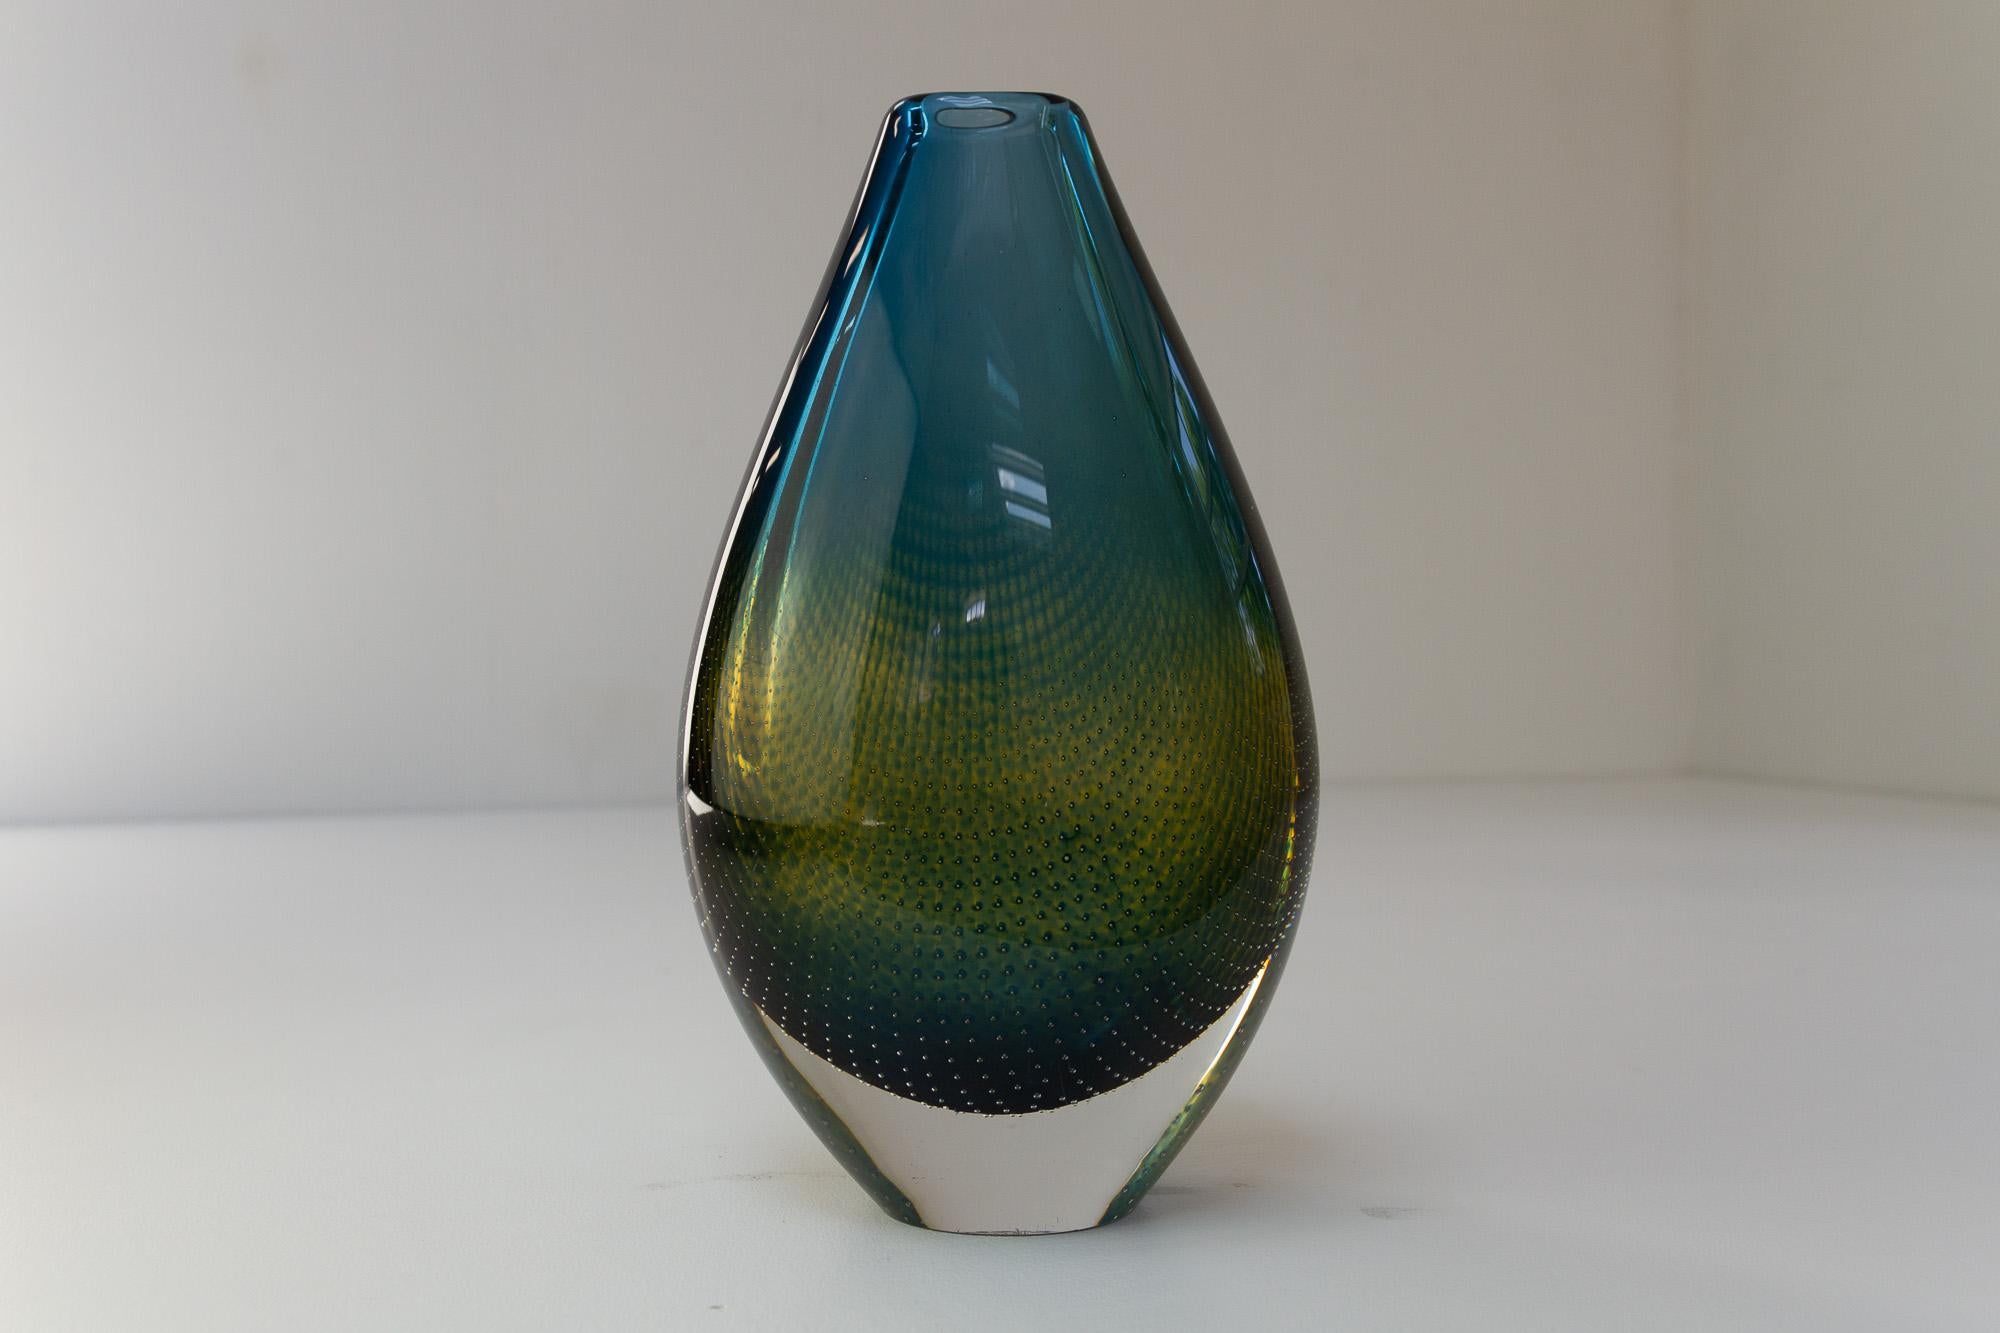 Vintage Swedish Kraka Glass Vase by Sven Palmqvist for Orrefors, Sweden  1960s.
Tear shaped hand blown clear glass vase with blue and green curved net pattern (fish net) with tiny inlaid air bubbles.
Engraved on the bottom: 